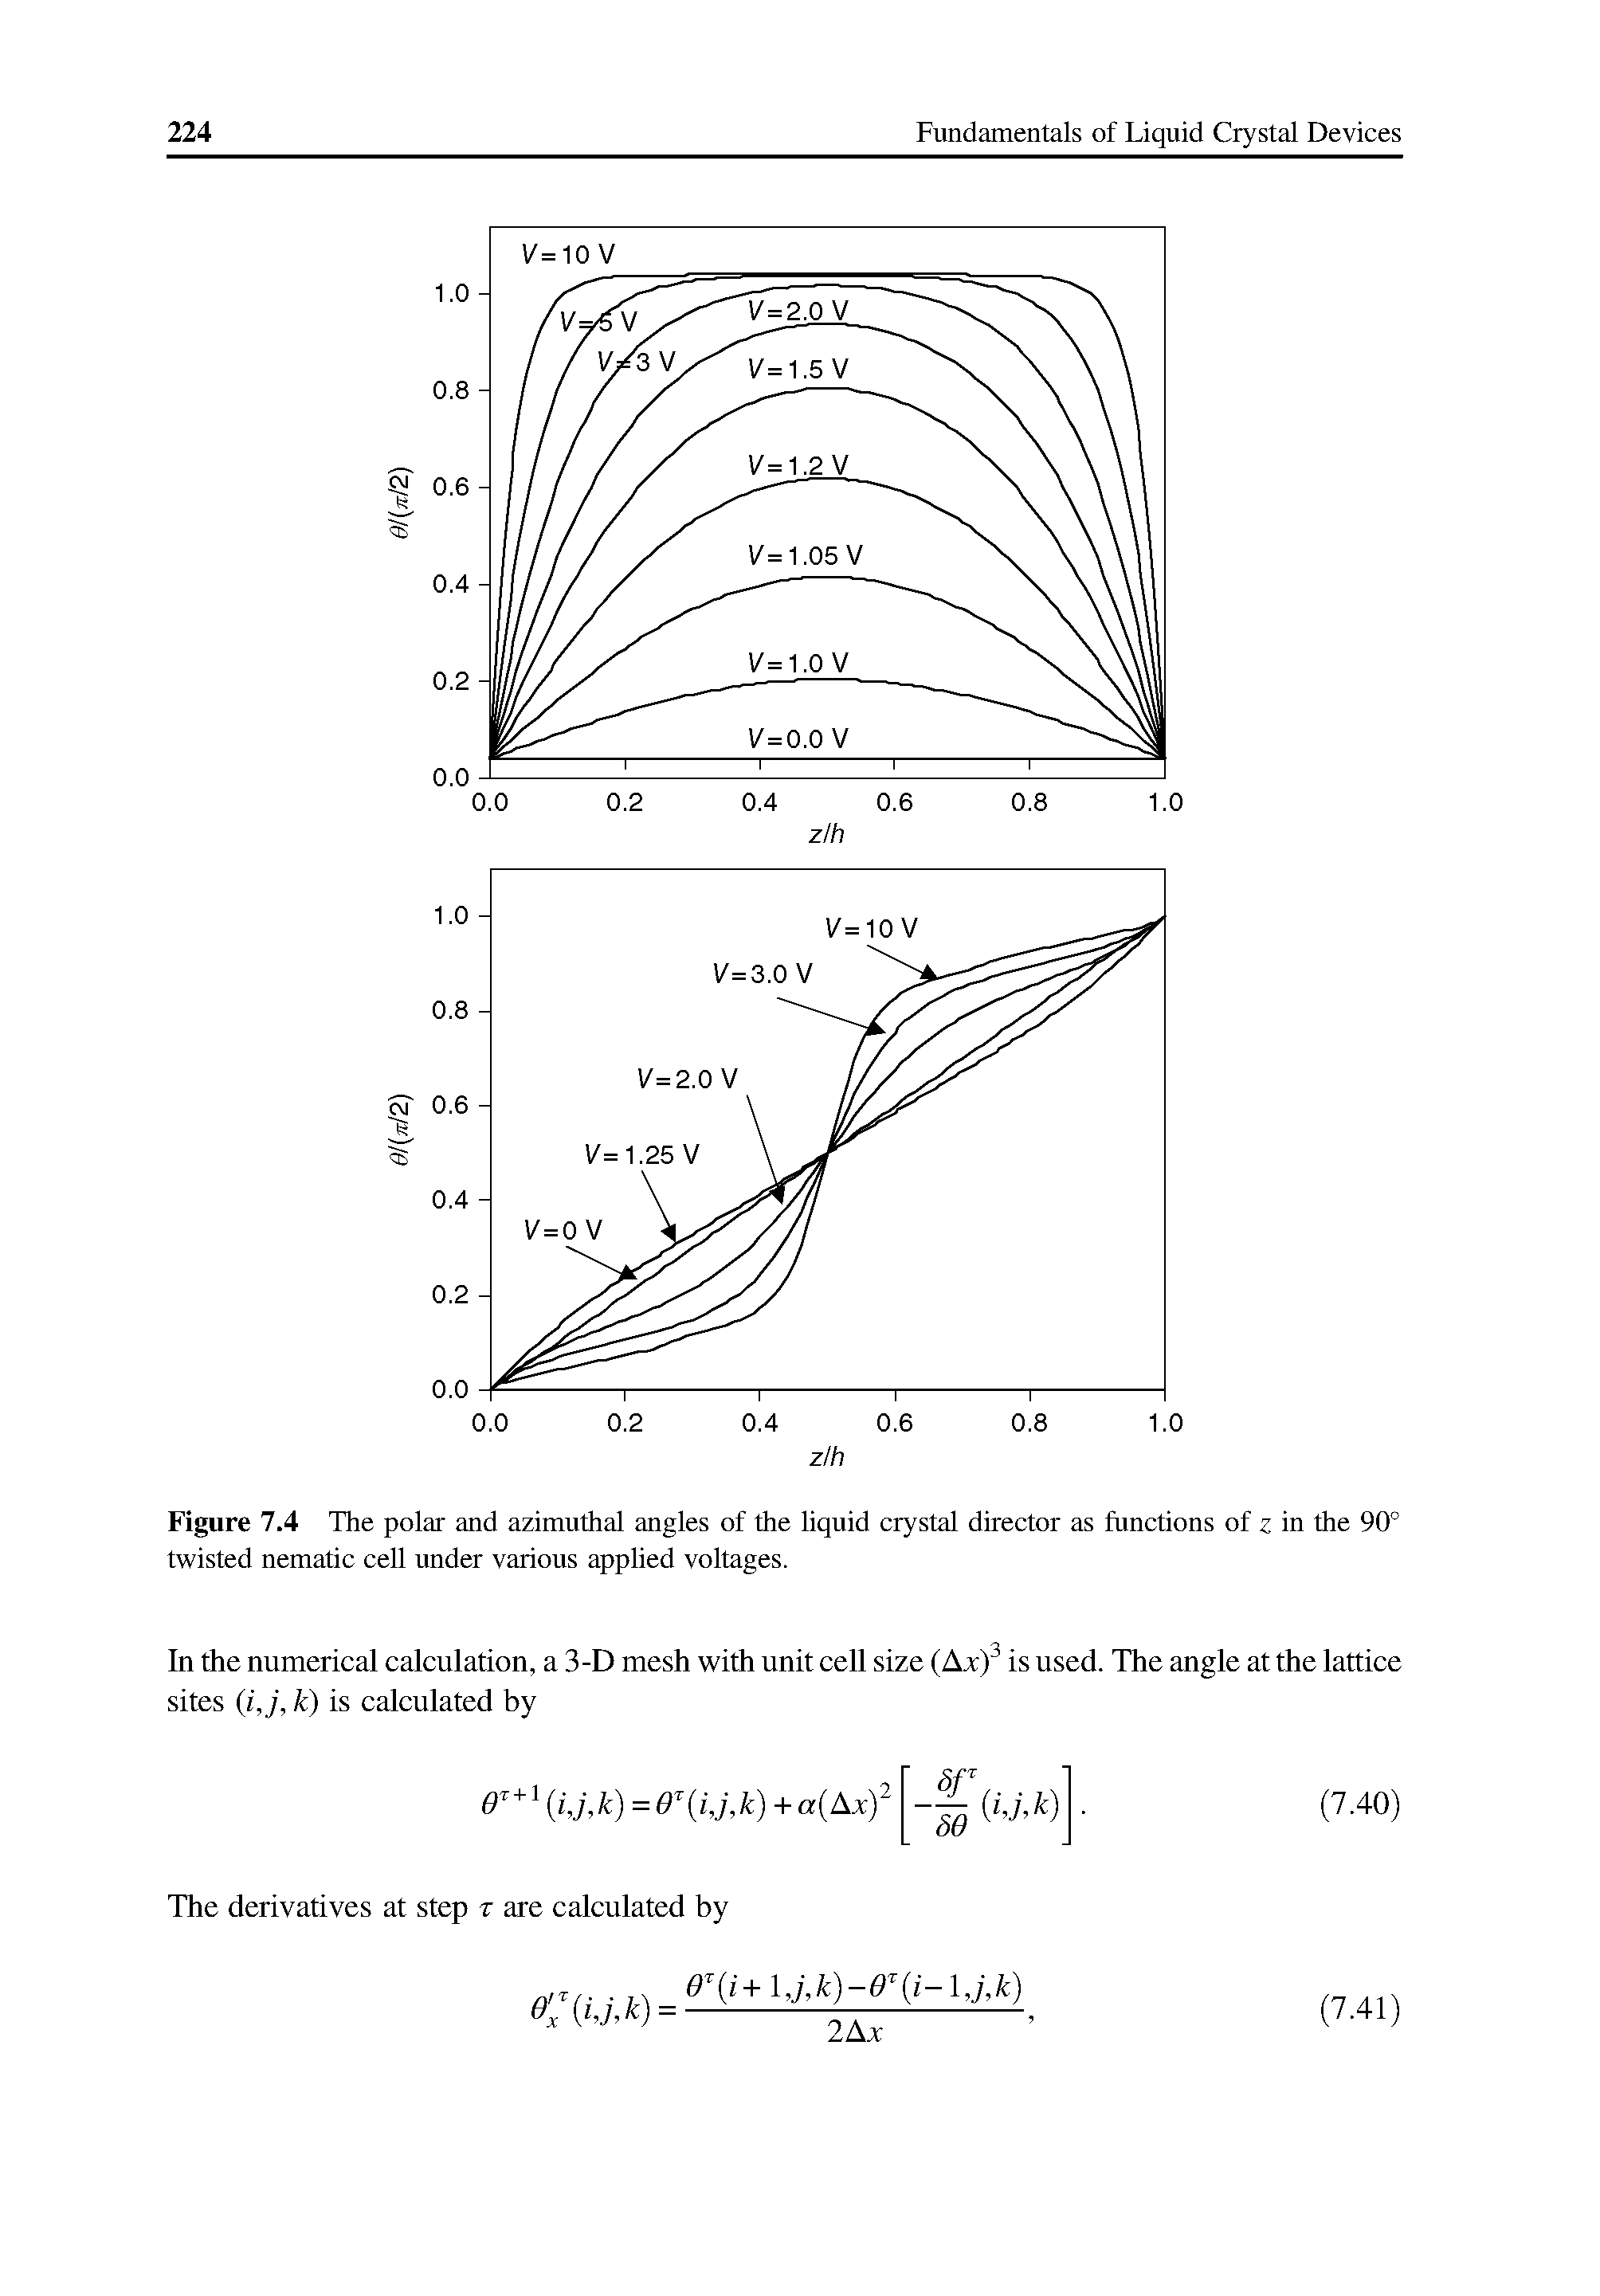 Figure 7.4 The polar and azimuthal angles of the liquid crystal director as functions of z in the 90° twisted nematic cell under various applied voltages.